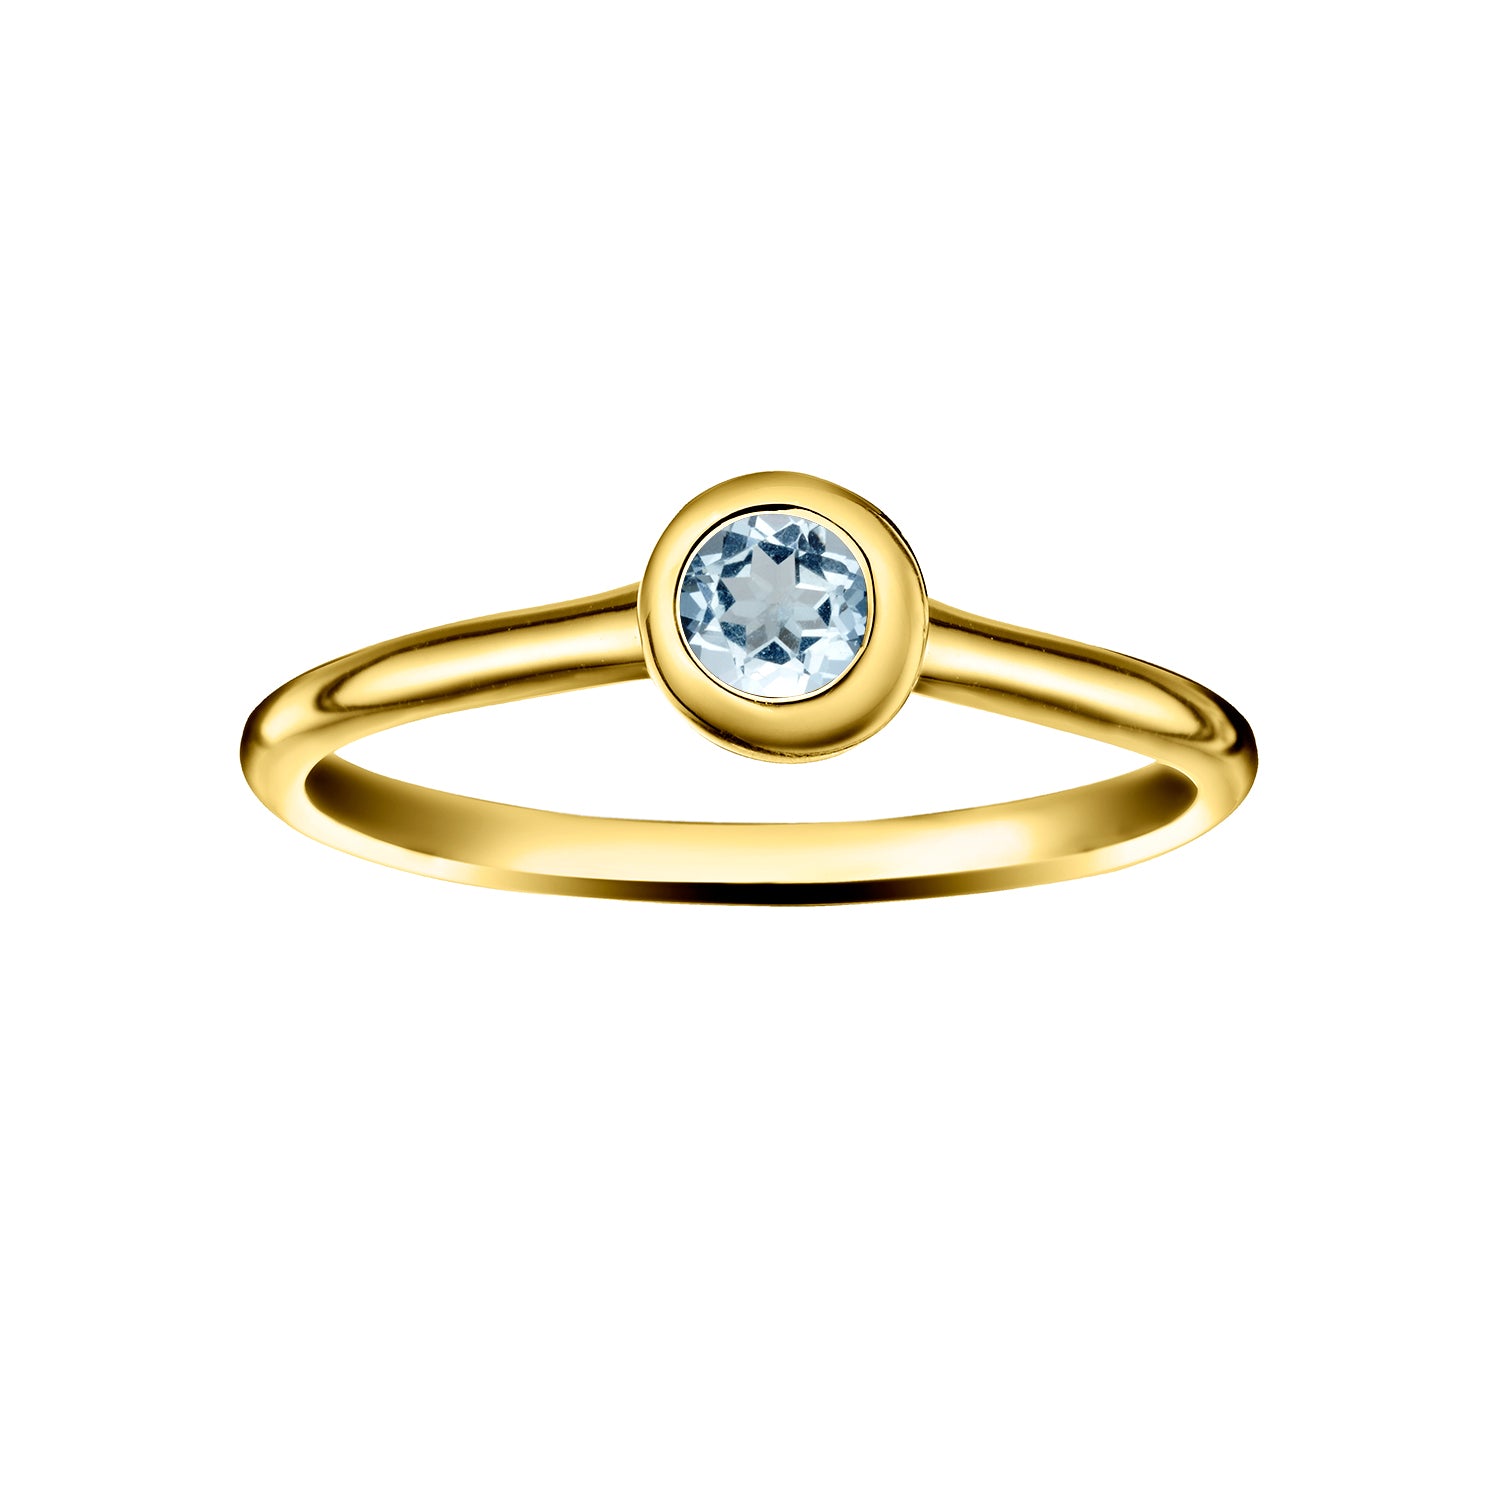 Polished Gold Vermeil Crescent Moon Stacking Birthstone Rings - March / Aquamarine